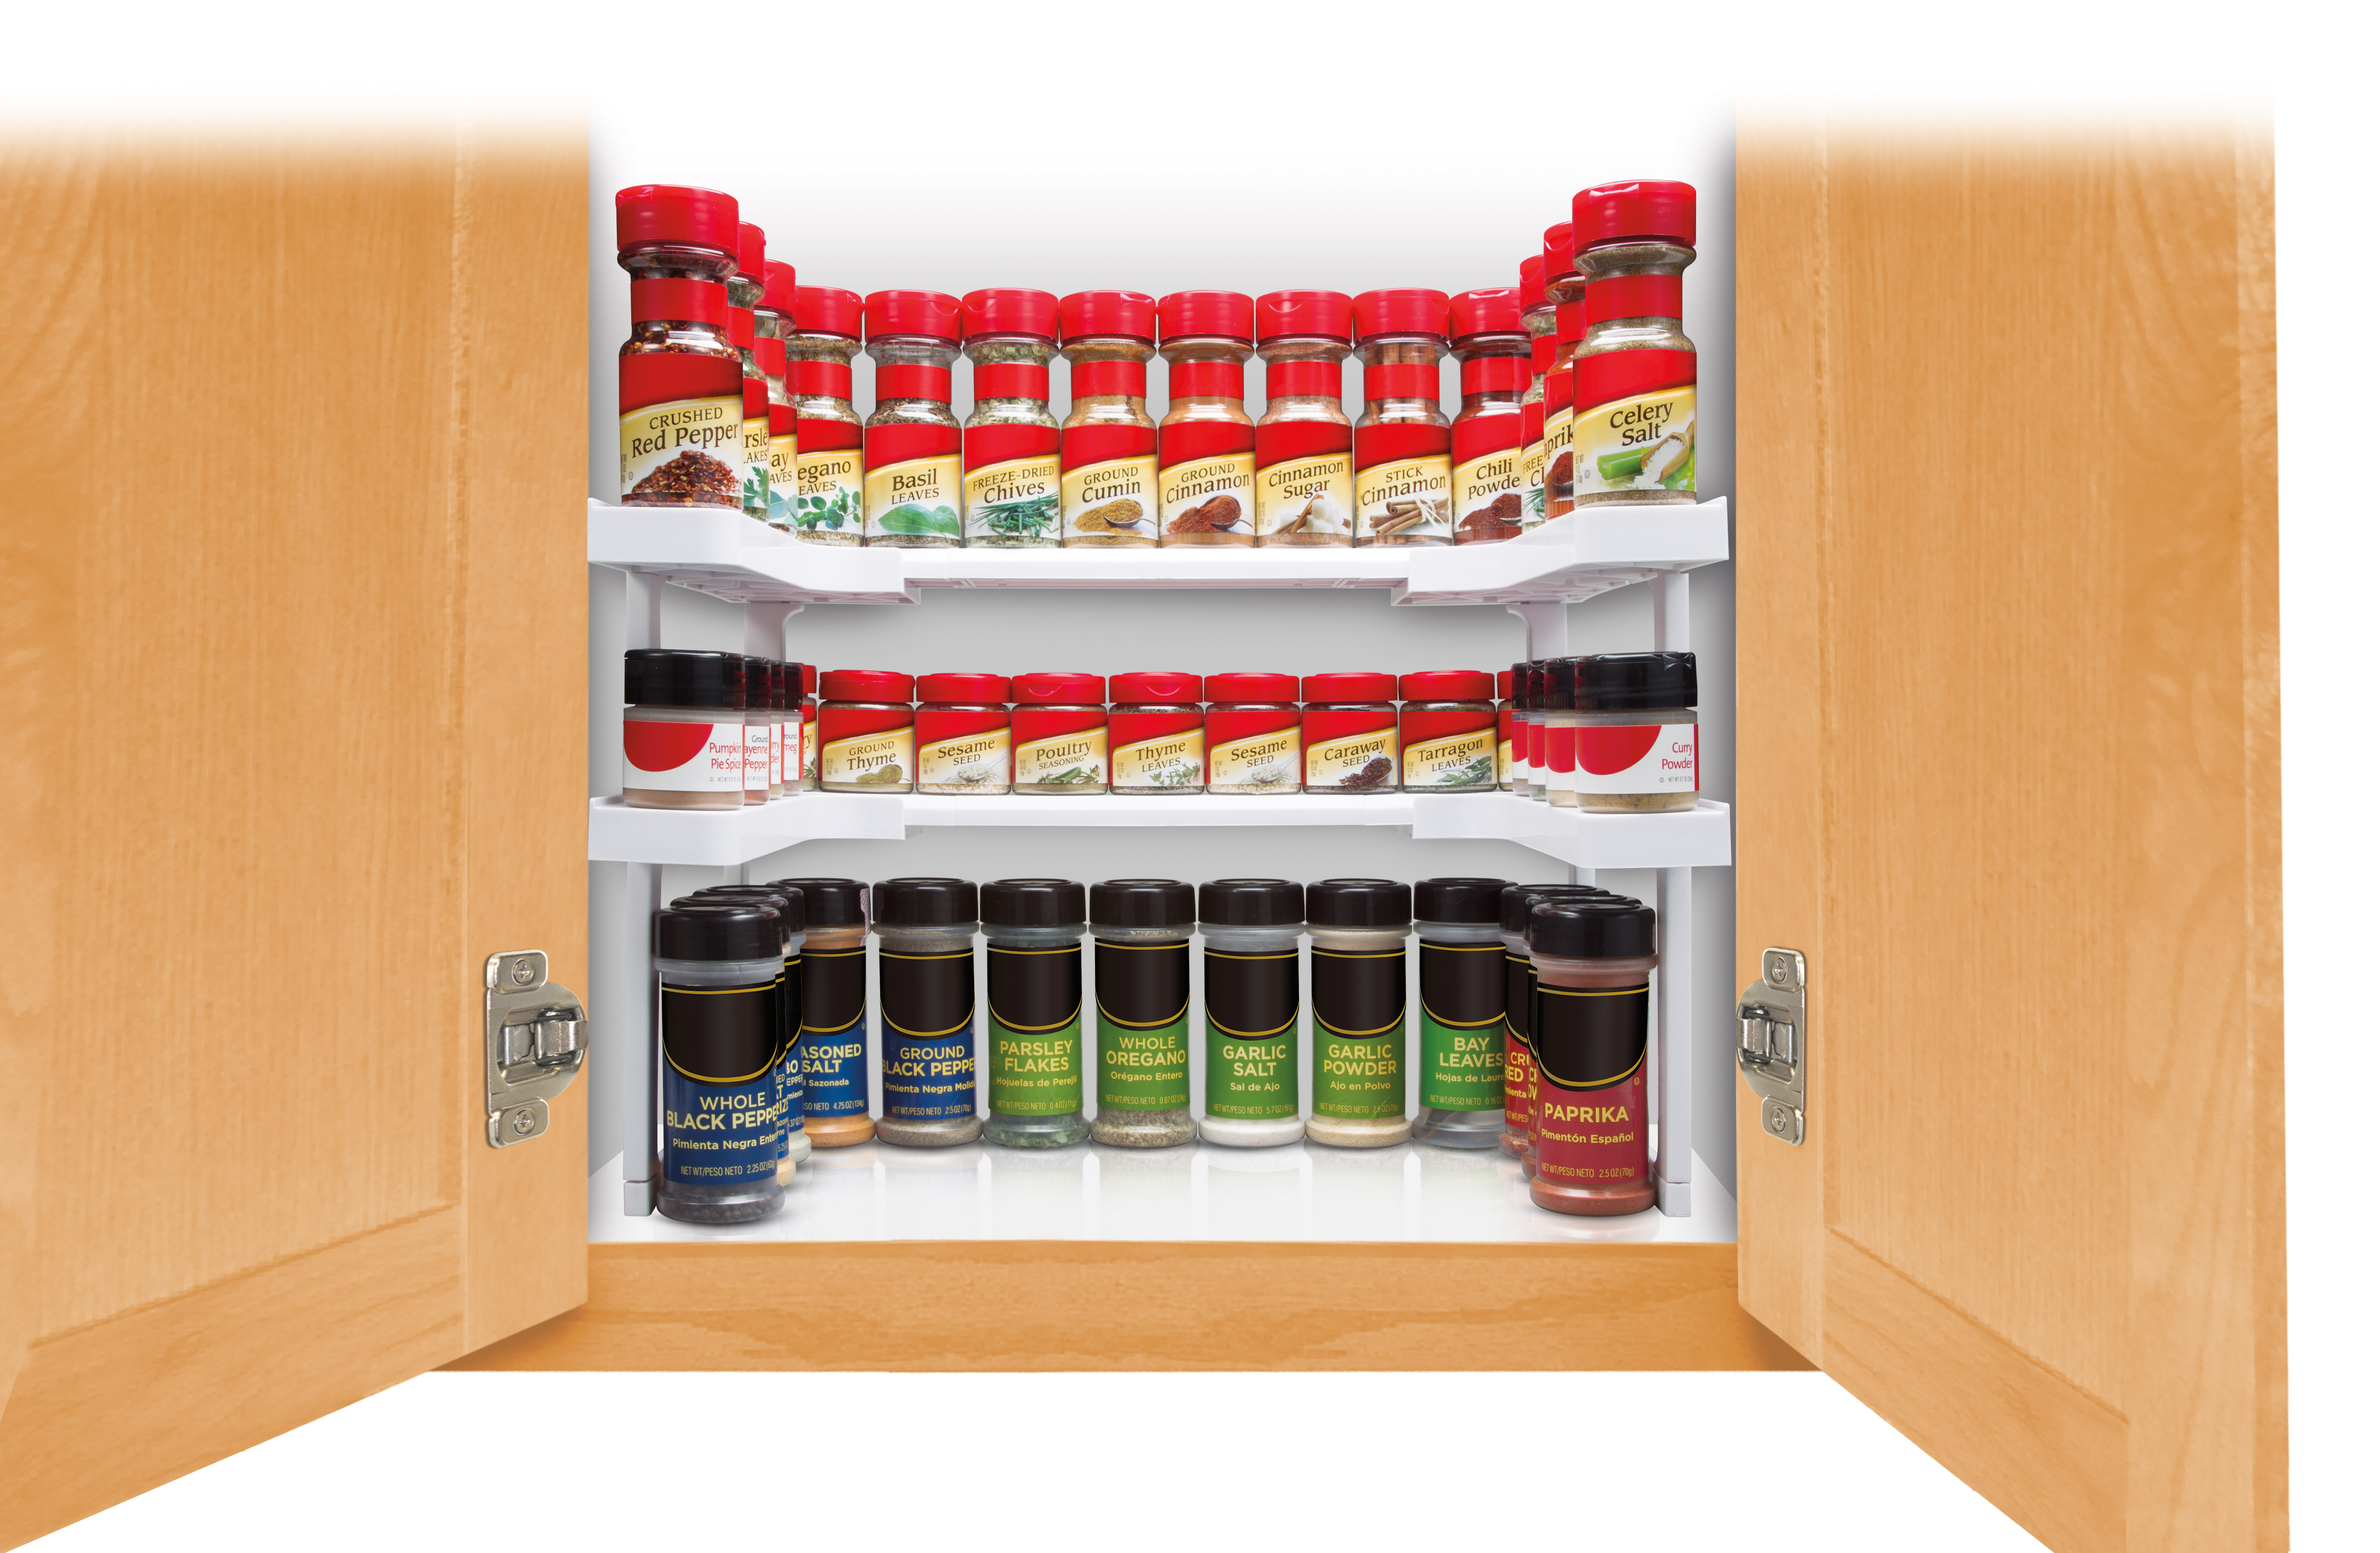 Spicy Shelf Universal Organizer for Cabinets, Spice Jar Organization for Pantry, As Seen on TV - image 2 of 7